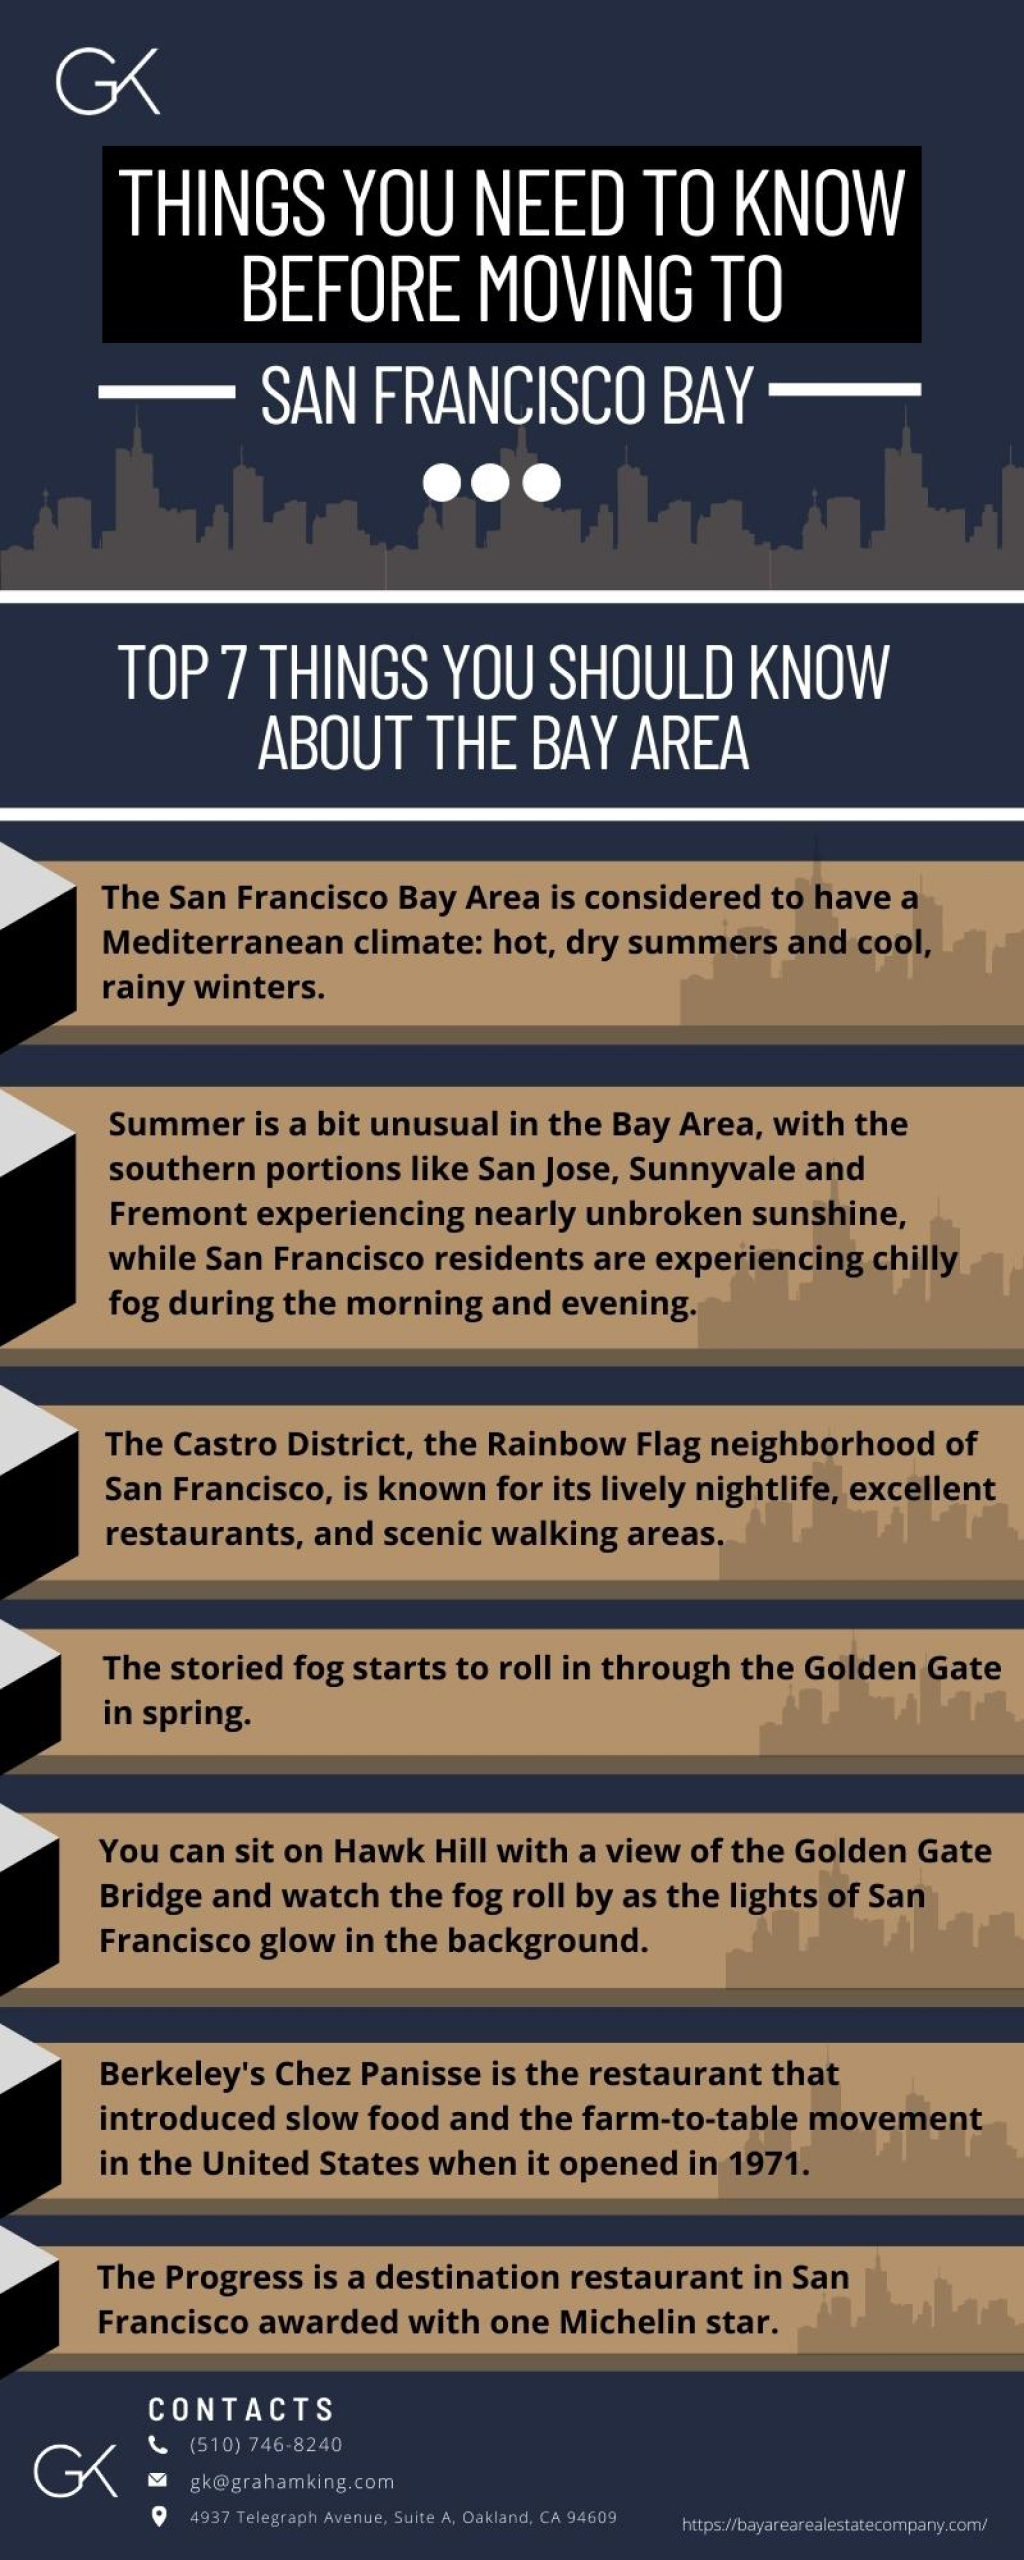 Things You Need to Know Before Moving to San Francisco Bay Area